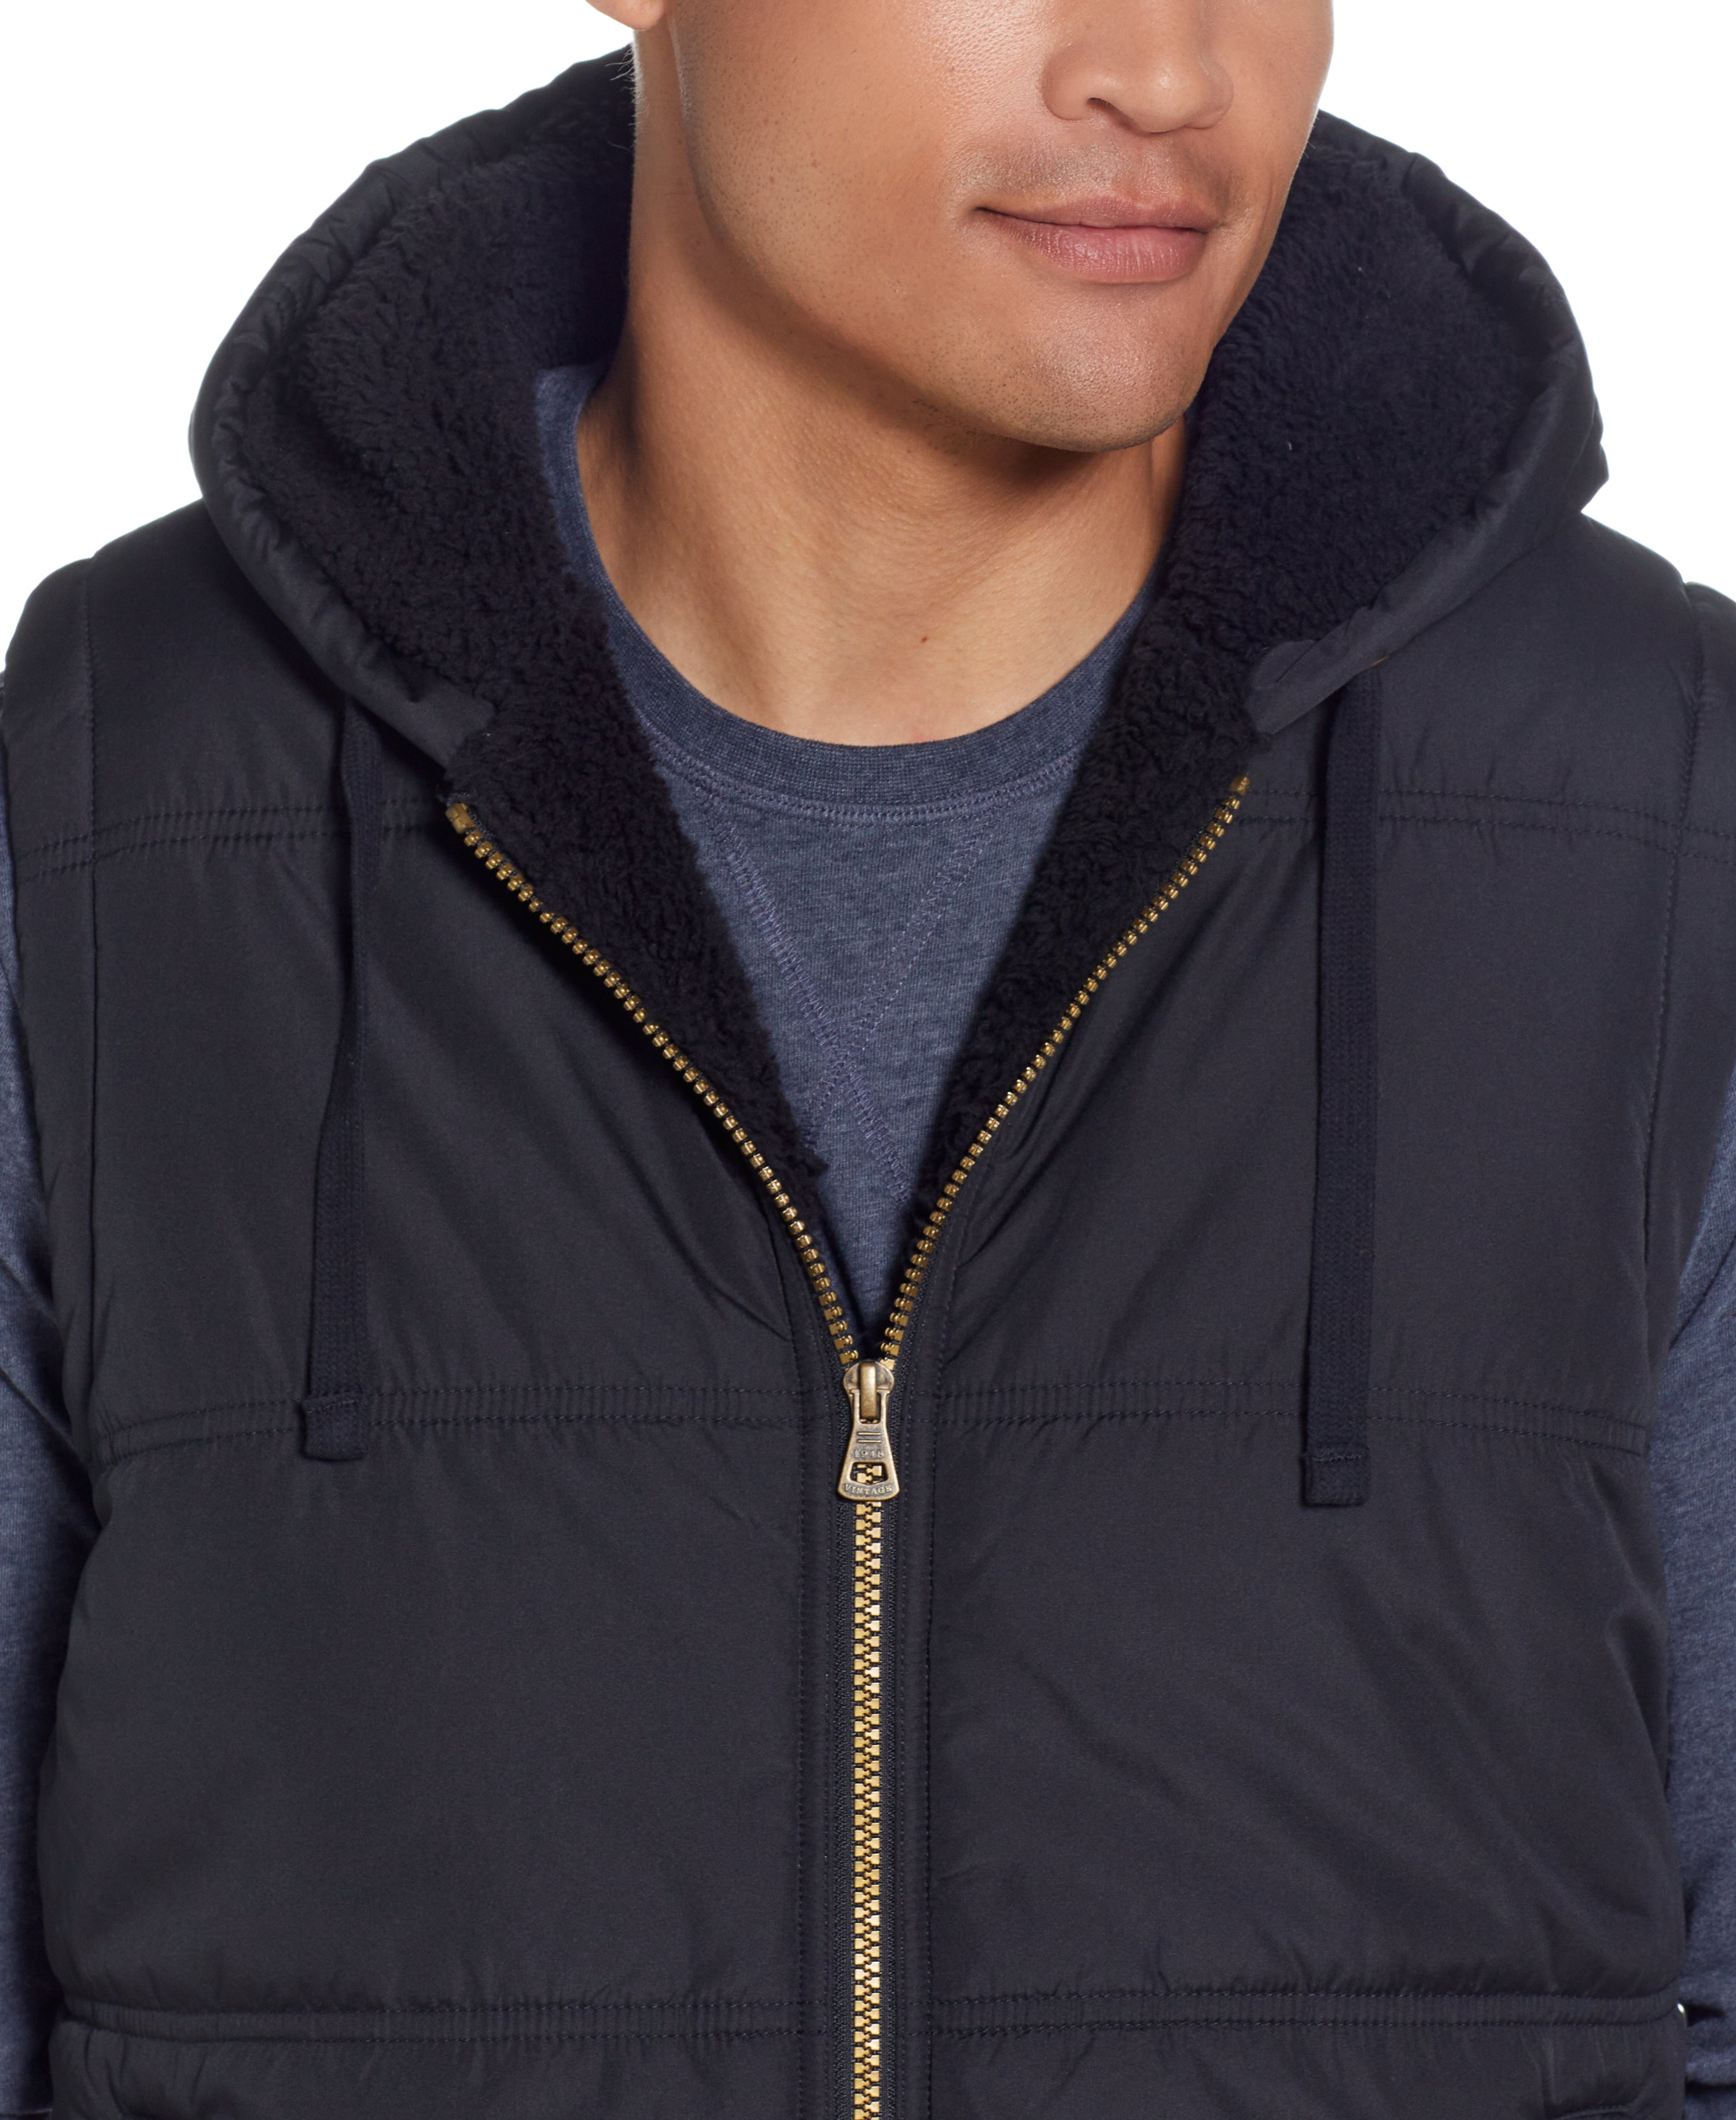 SHERPA LINED HOODED PUFFER VEST in BLACK